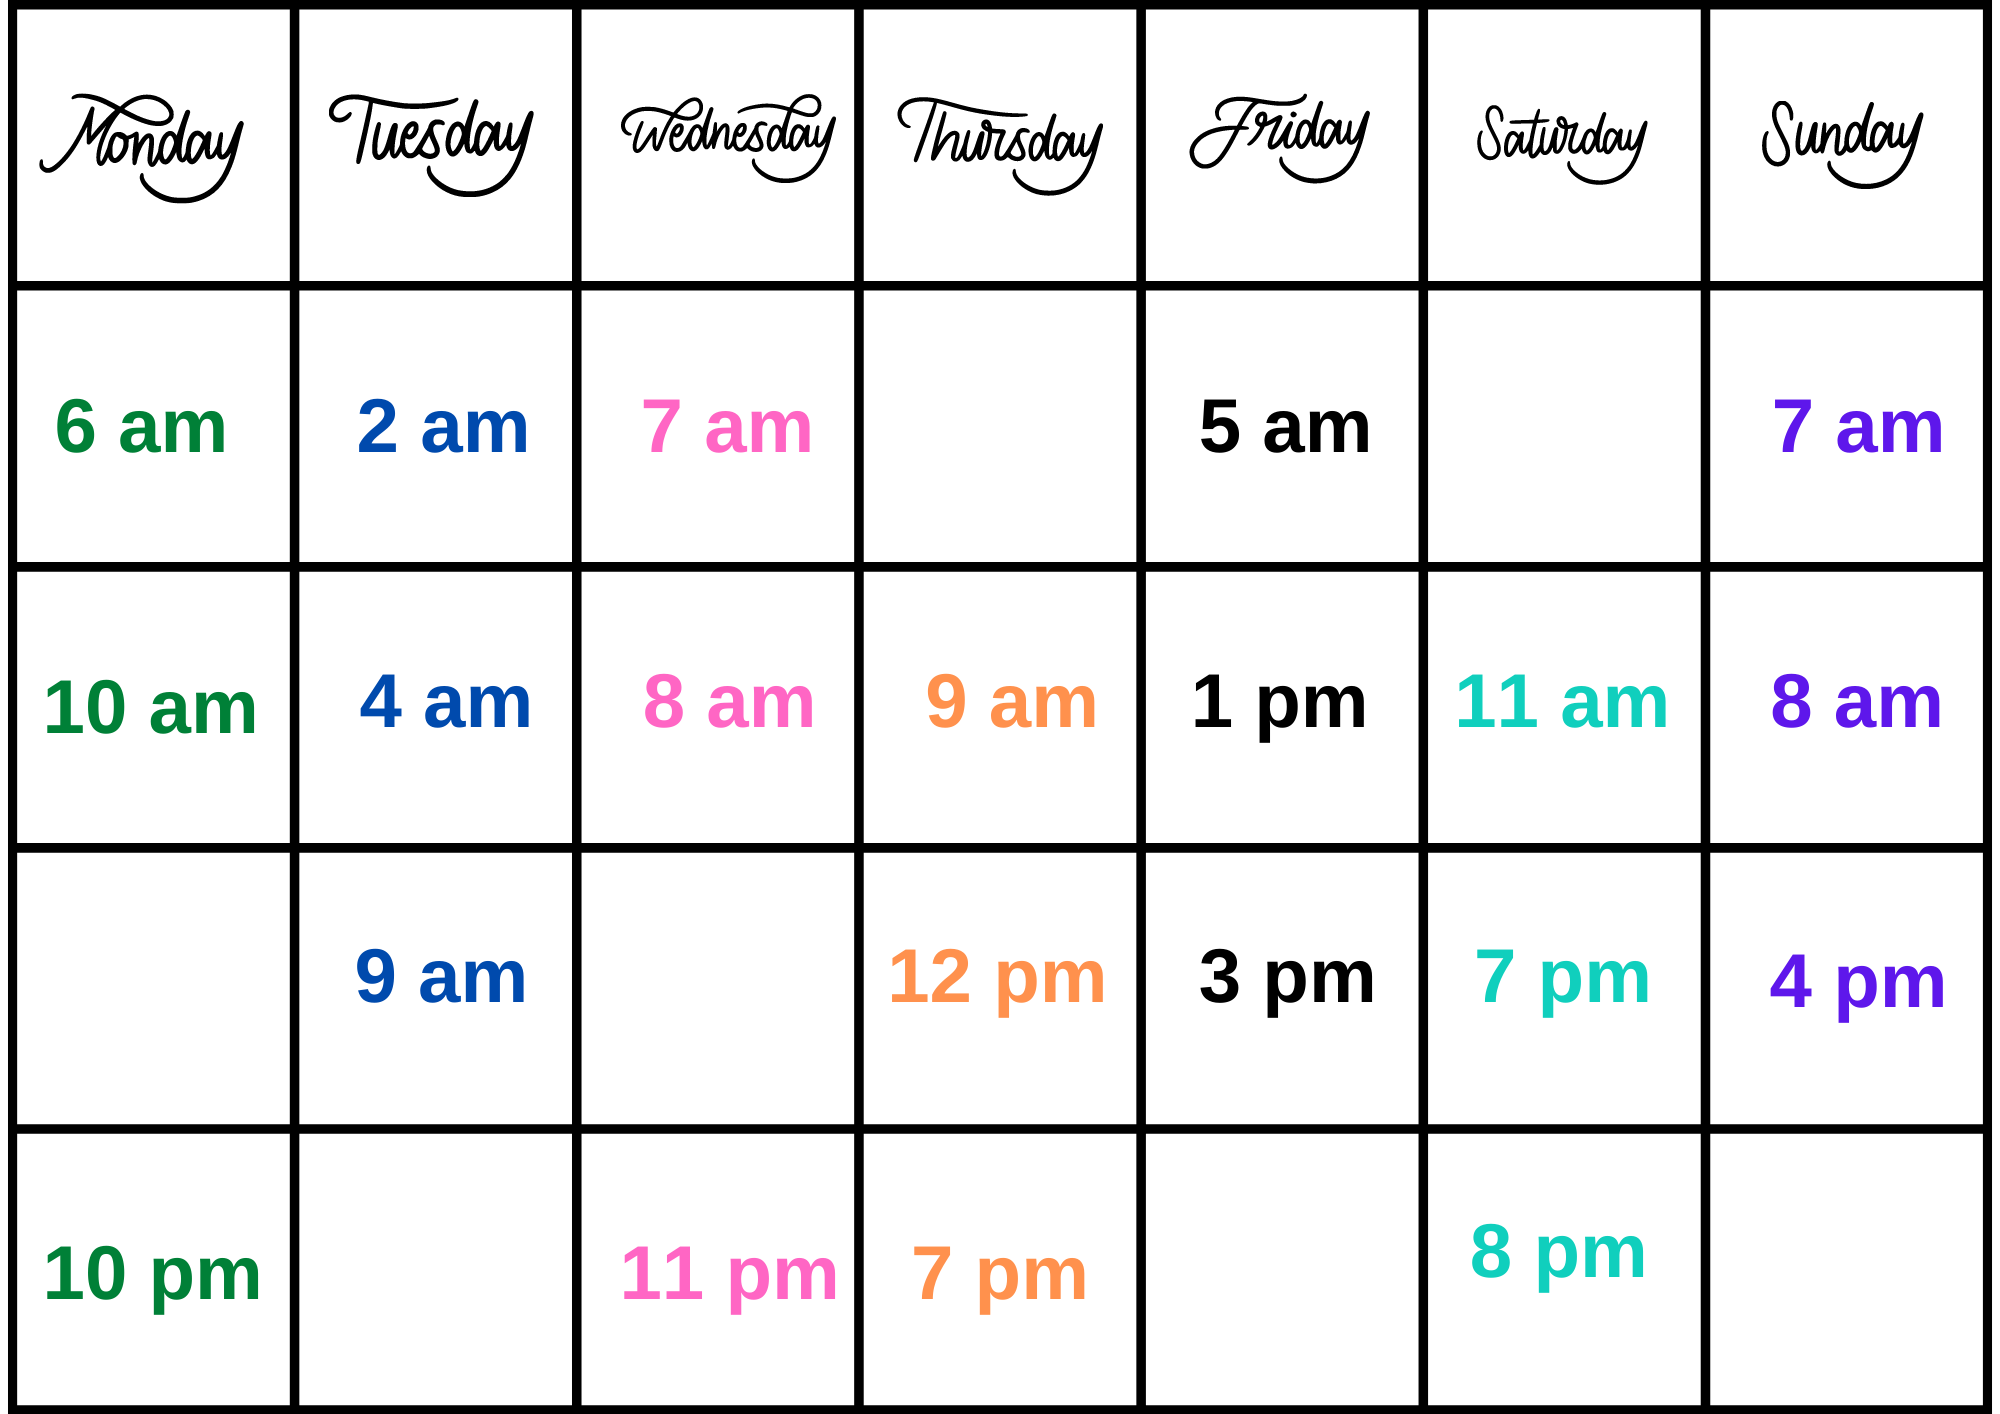 Best times to post on TikTok by week days and hours